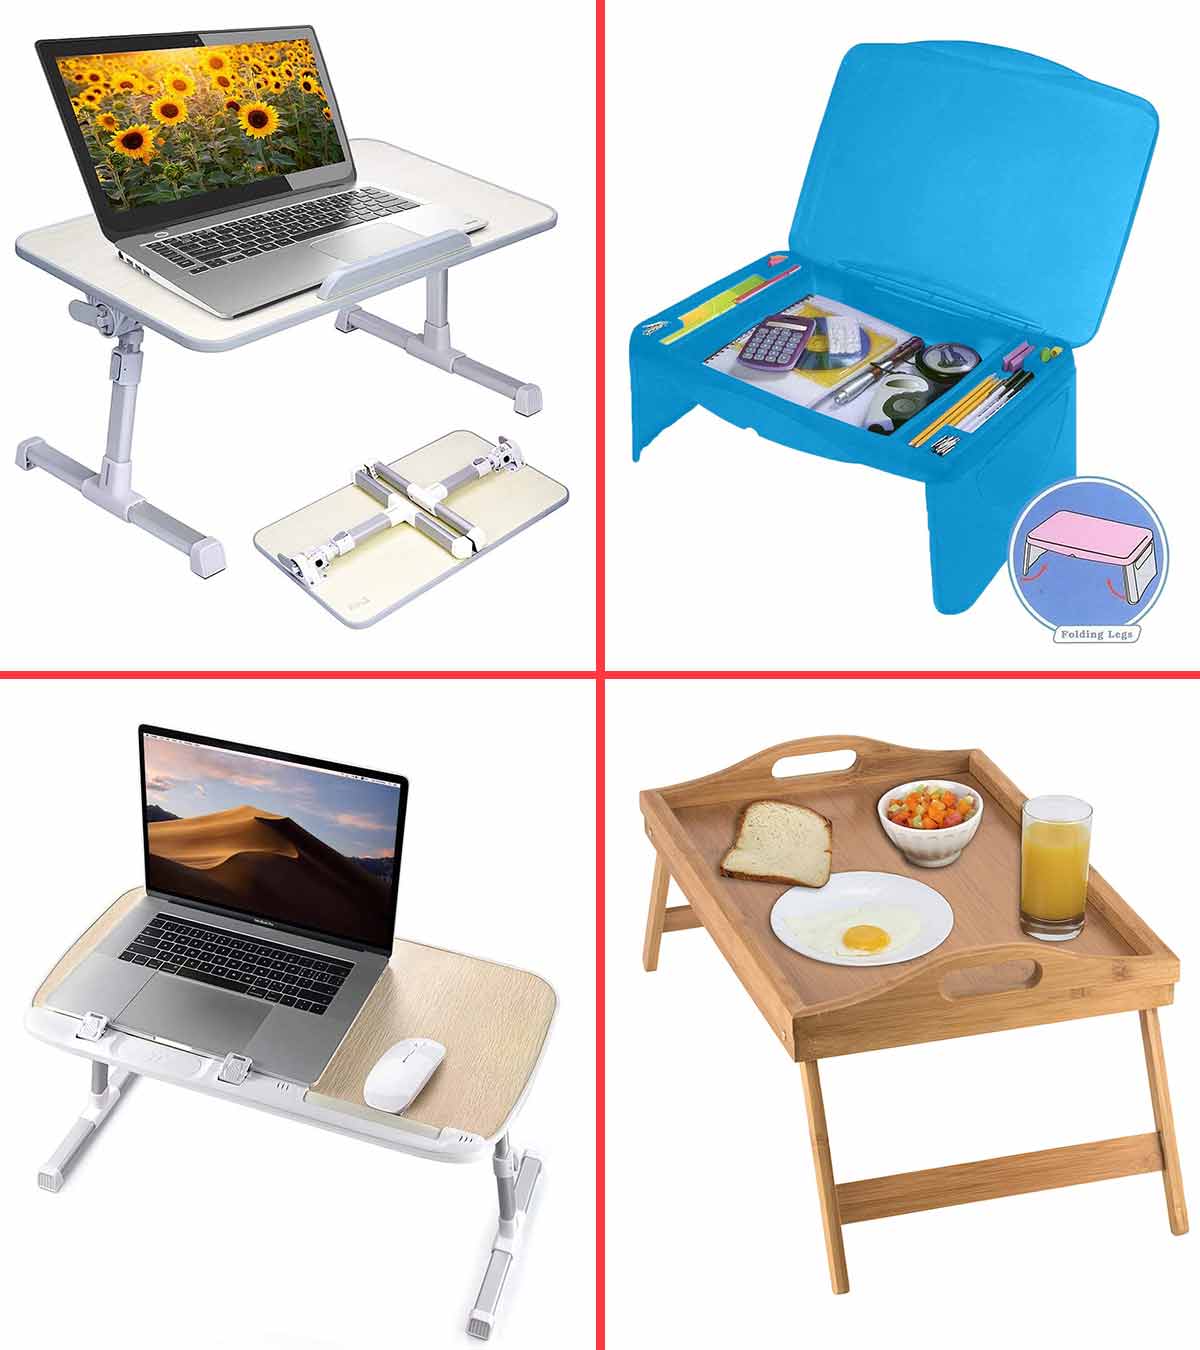 Laptop Bed Desk Table Tray Stand with Cup Holder/Drawer for Bed